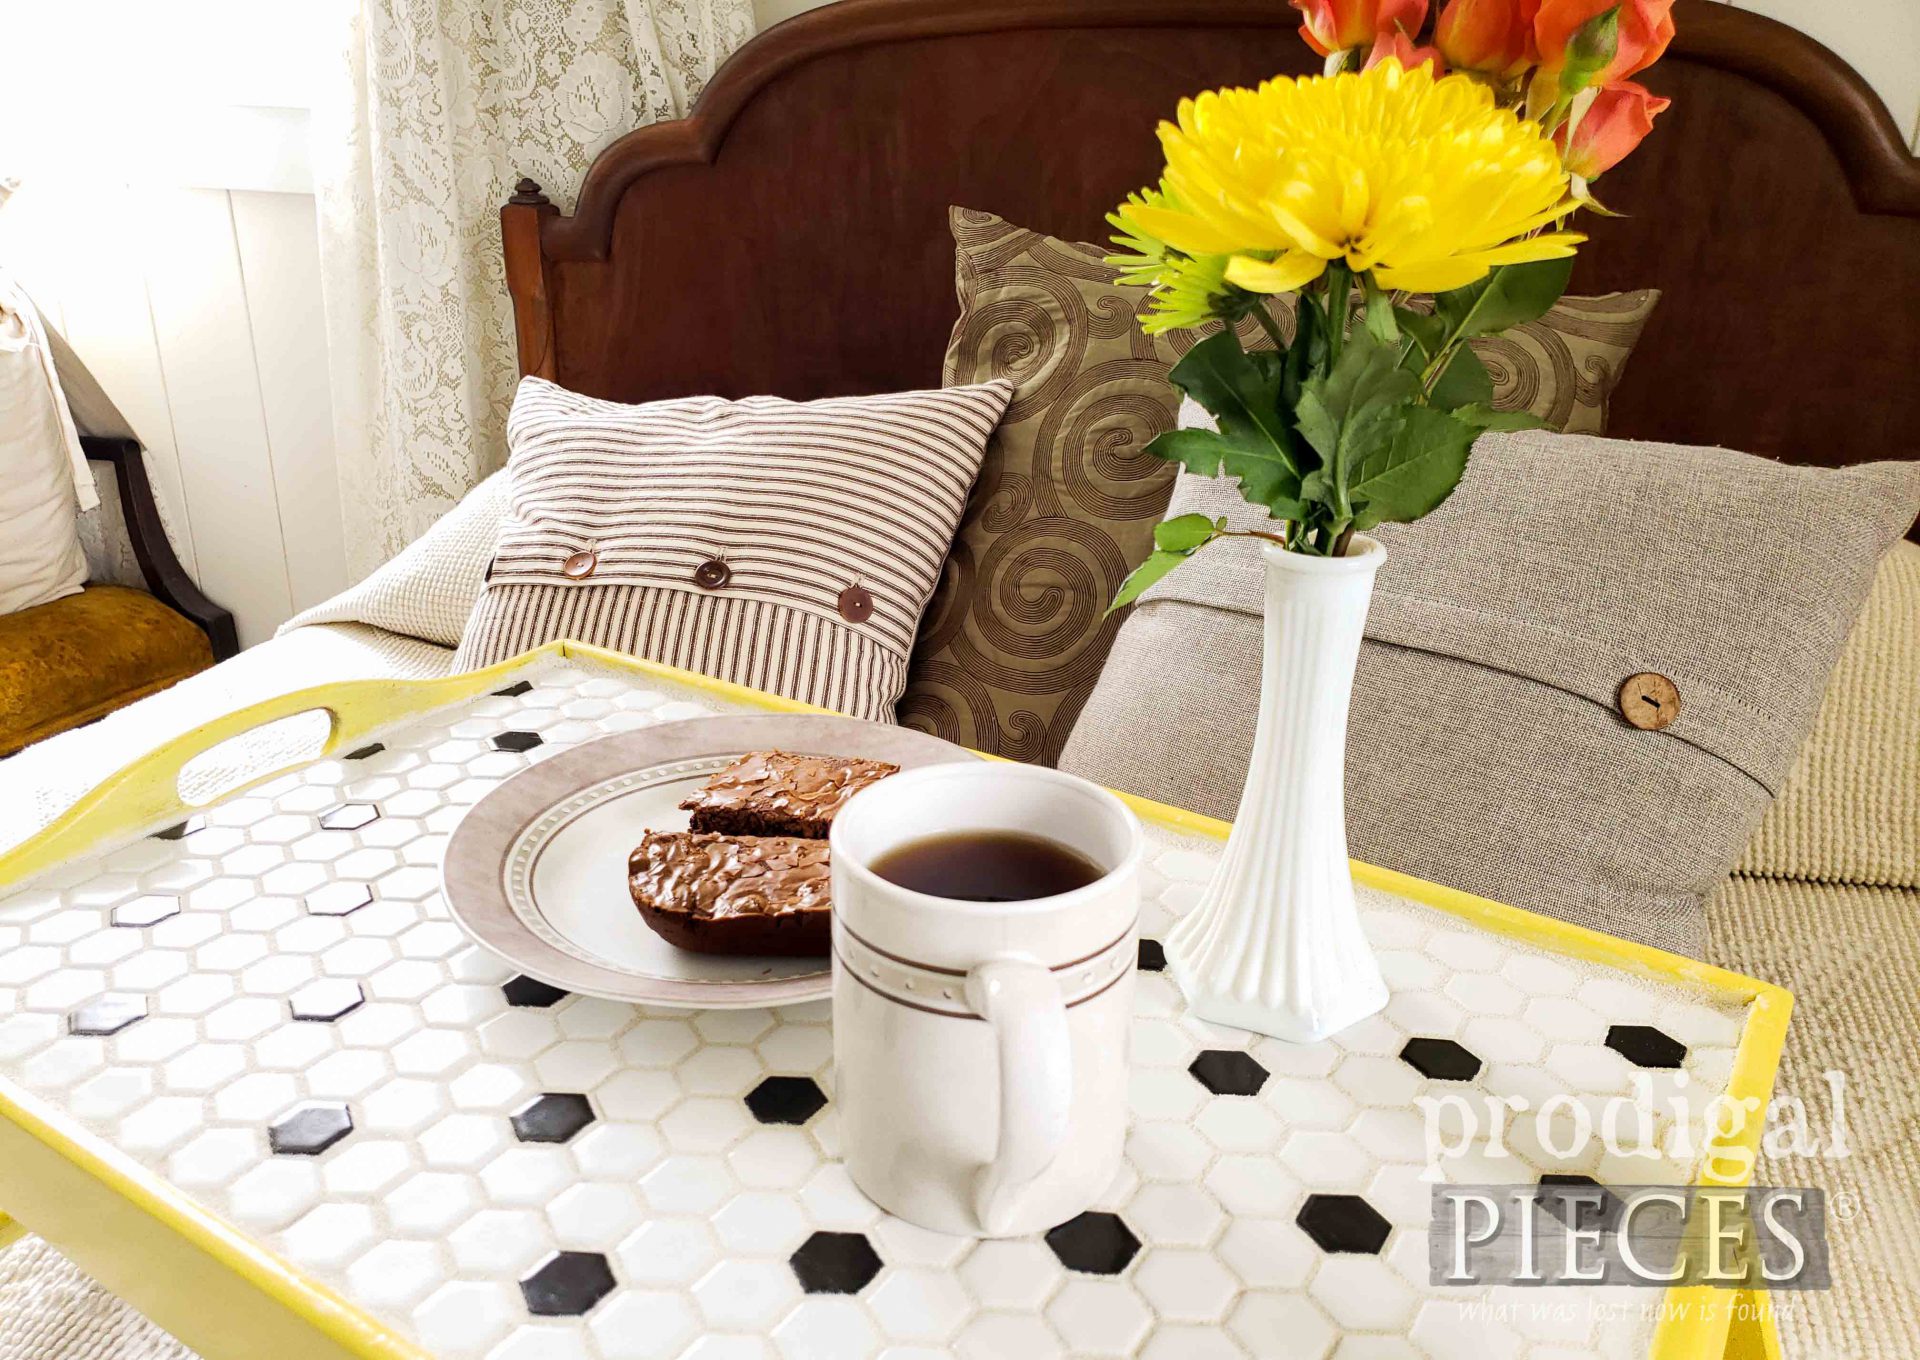 Breakfast Snack in Bed on Tiled Tray by Larissa of Prodigal Pieces | prodigalpieces.com #prodigalpieces #bedroom #diy